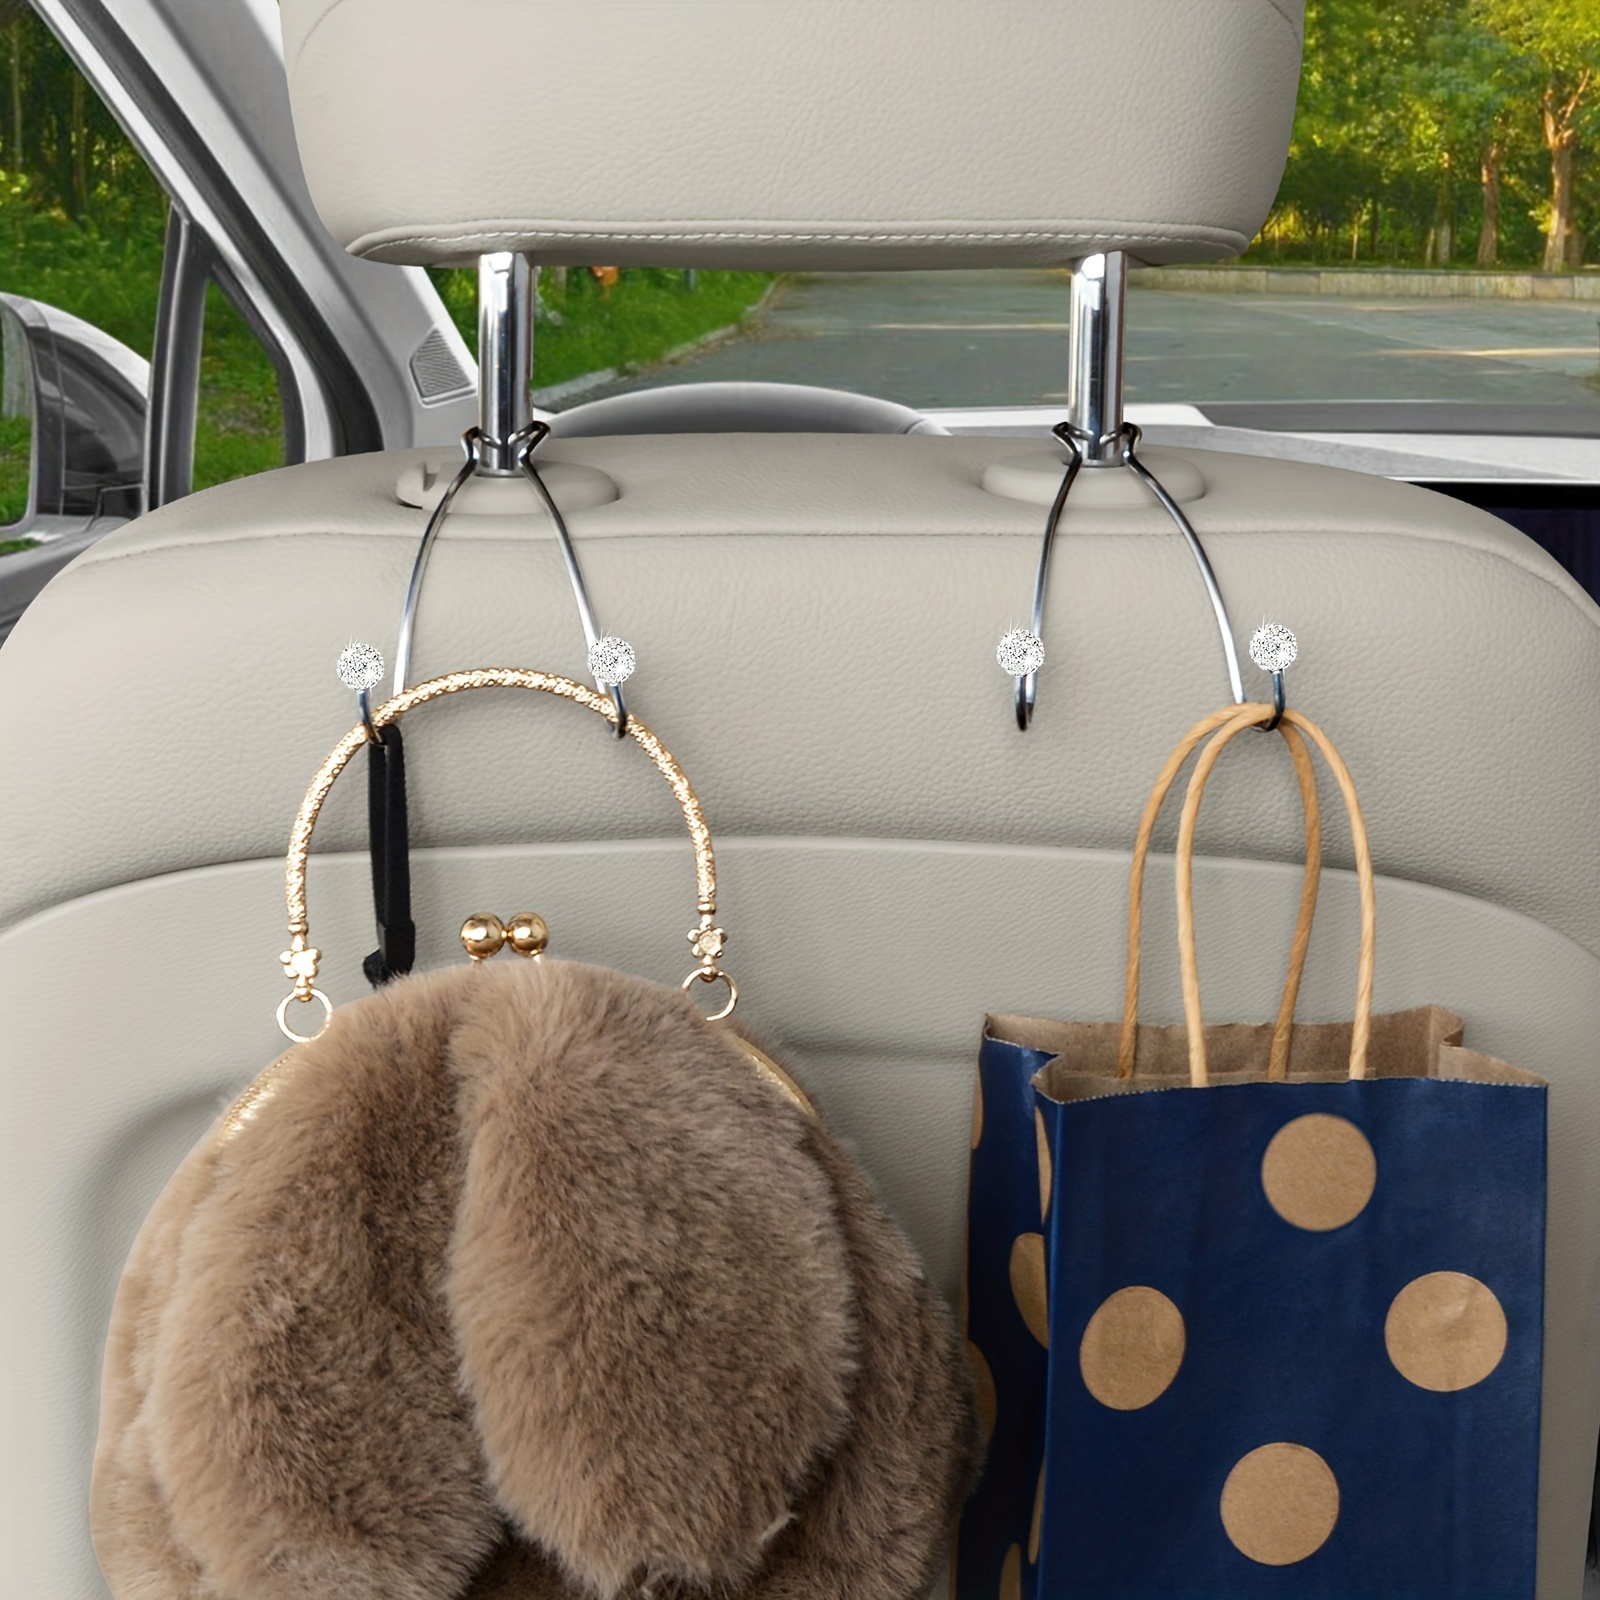 Bling Car Headrest Hooks For Purses And Bags, Upgraded Car Purse